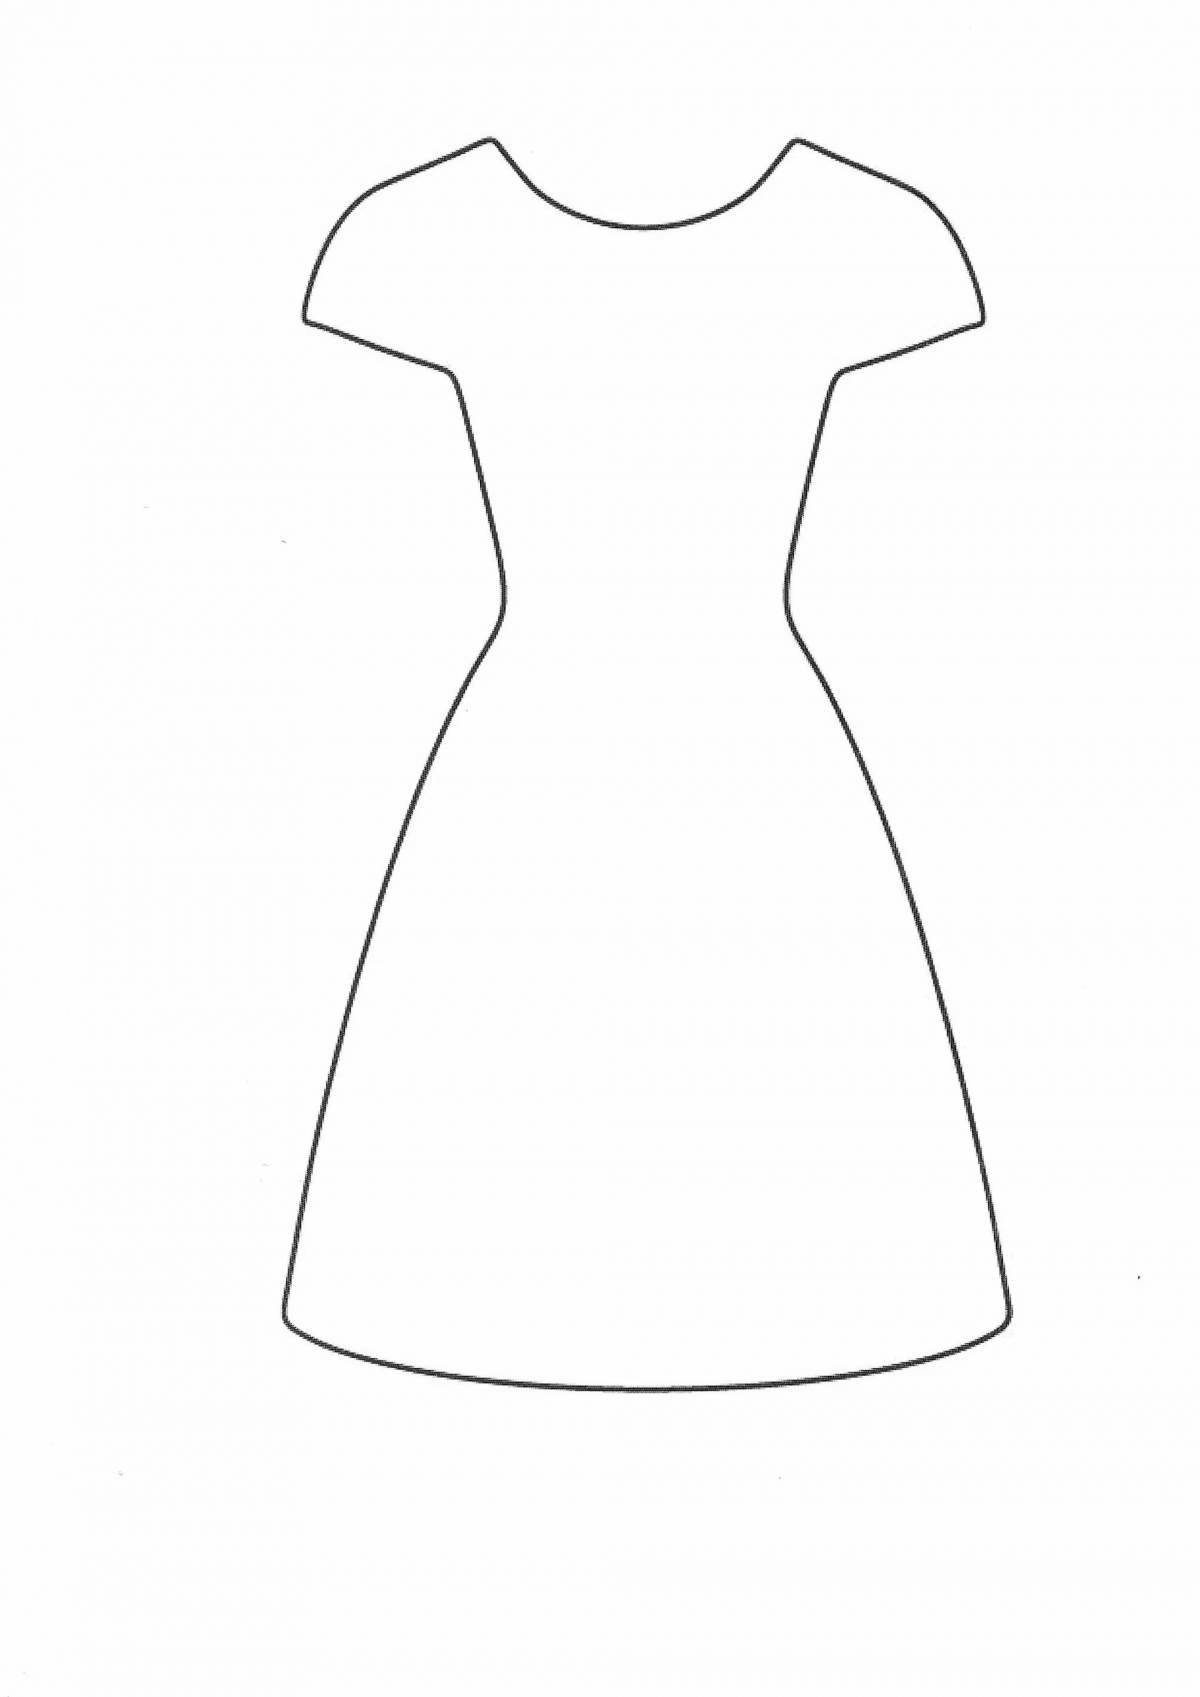 Coloring fairy dress for dolls